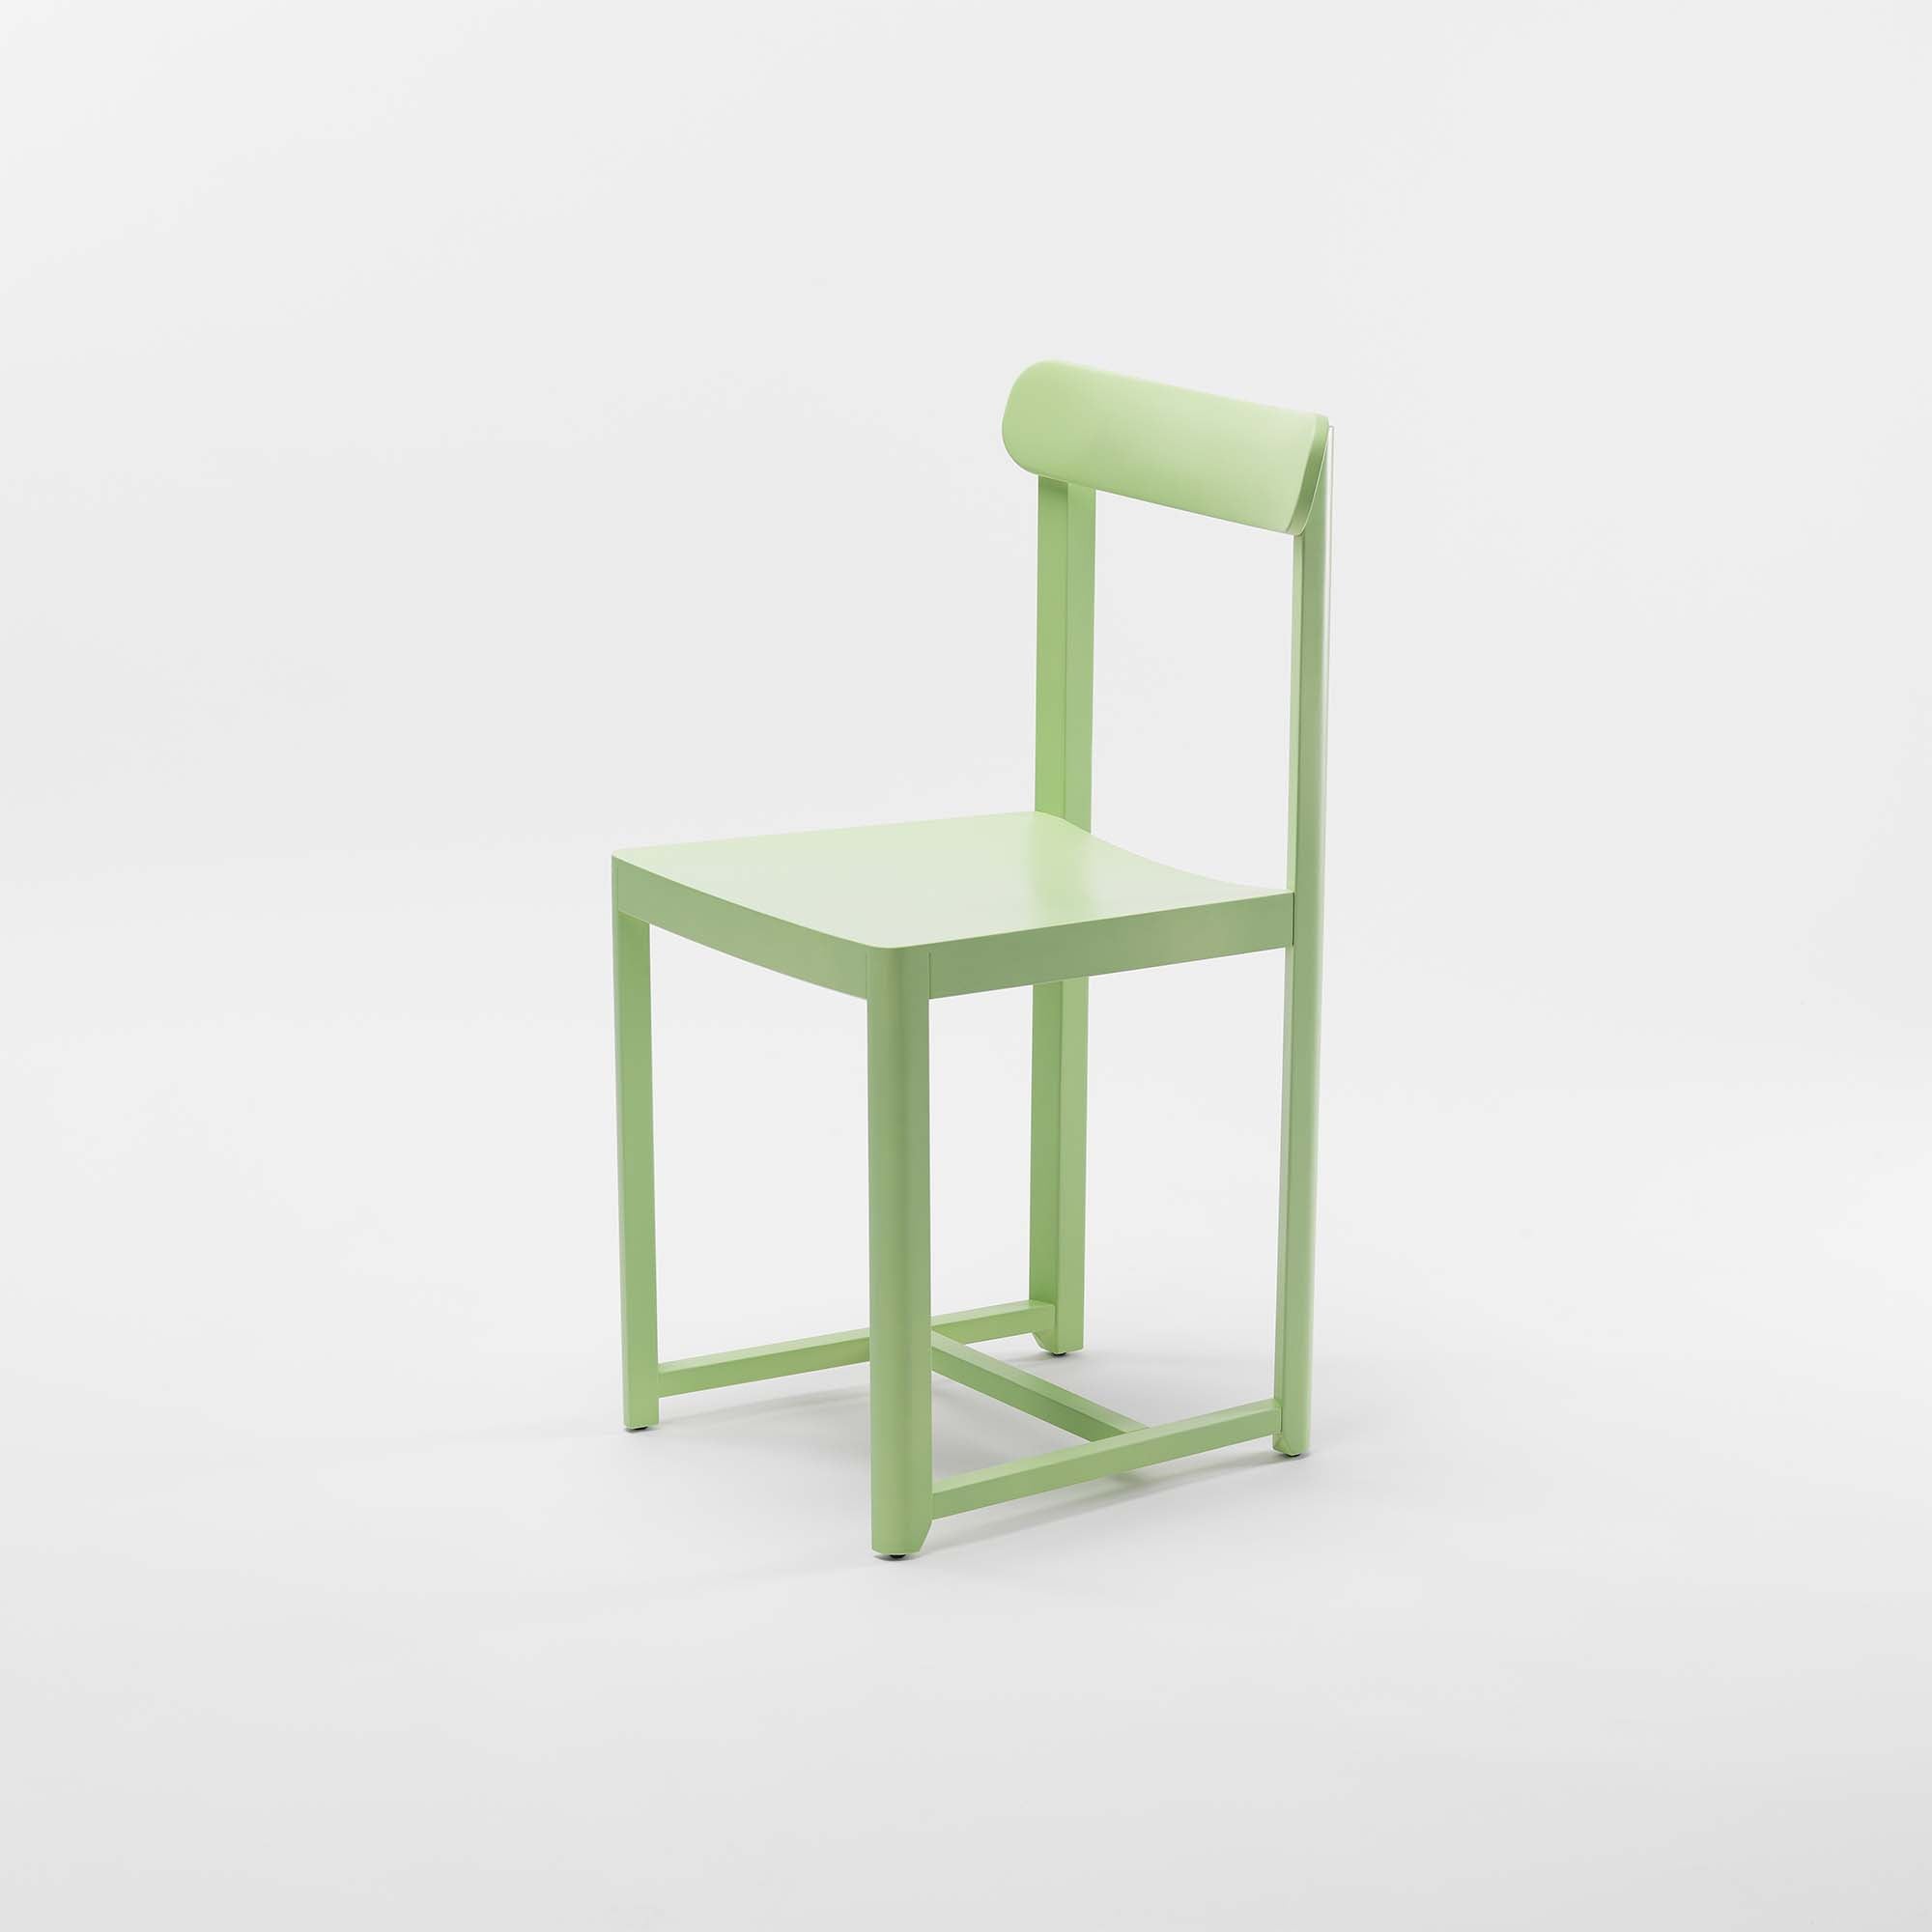 SELERI Chair Plywood Seat Turquoise Lacquered side view